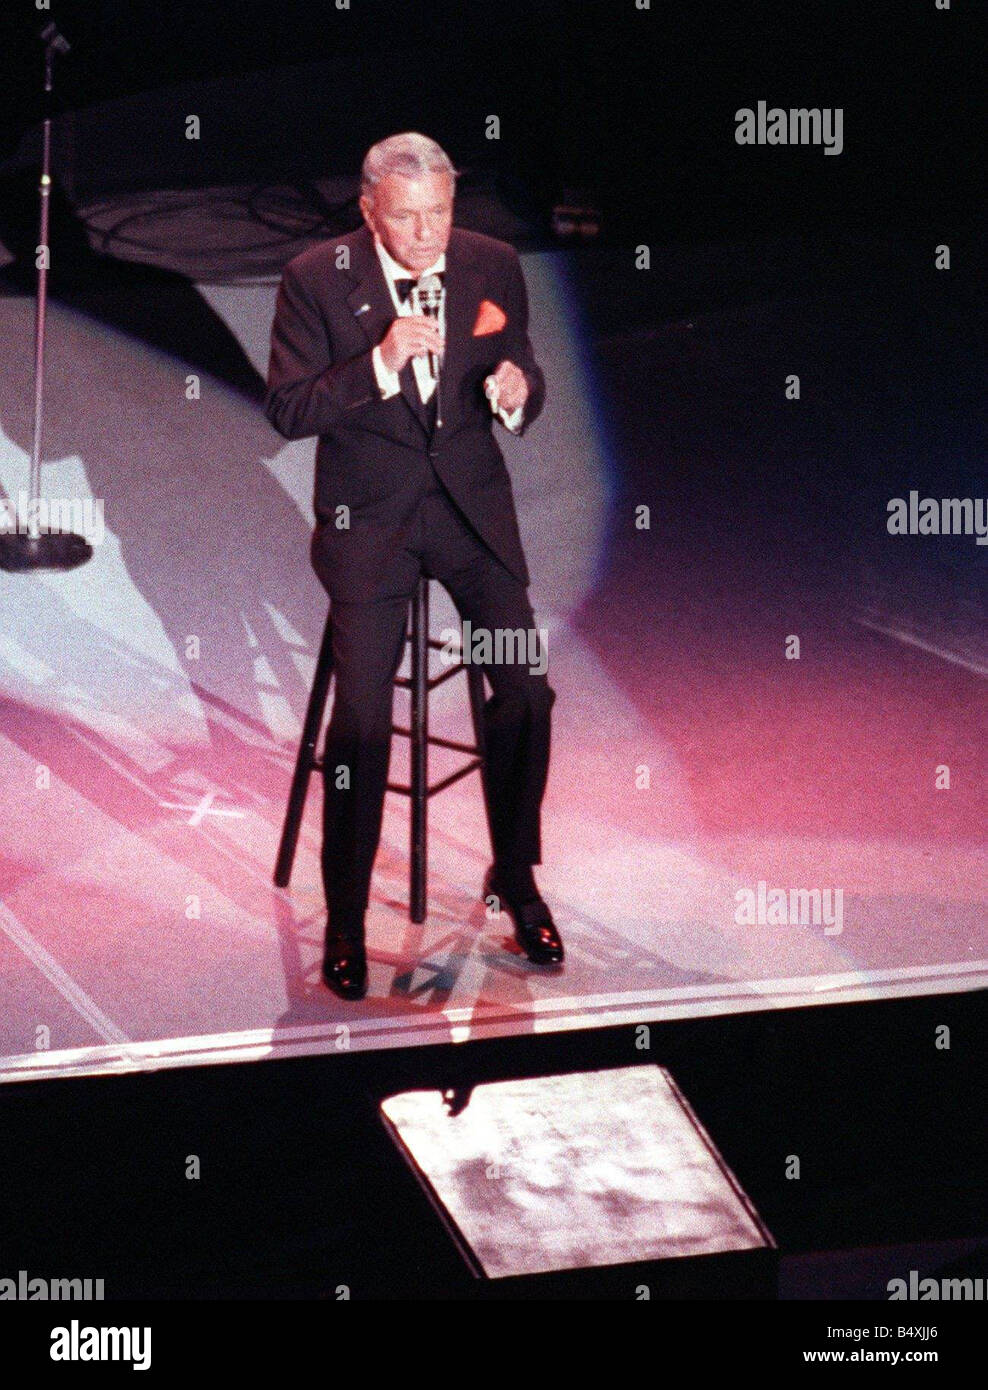 Frank Sinatra in concert sitting on high stool Ibrox July 1990 Glasgow Stock Photo